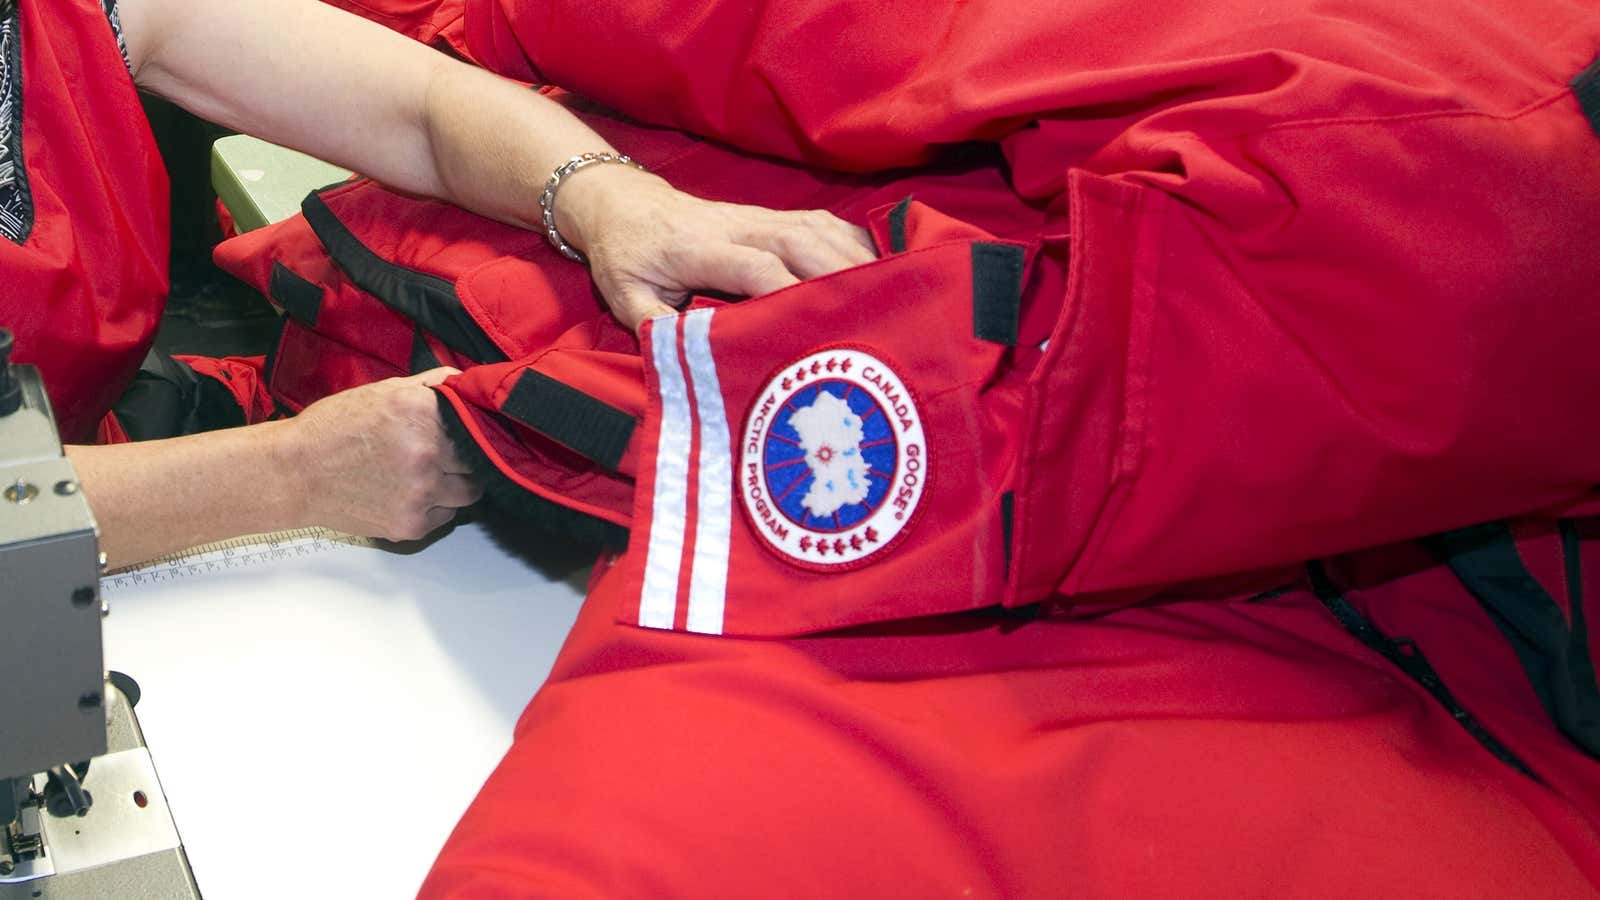 Potential investors are excited for Canada Goose’s IPO, and maybe PETA most of all.